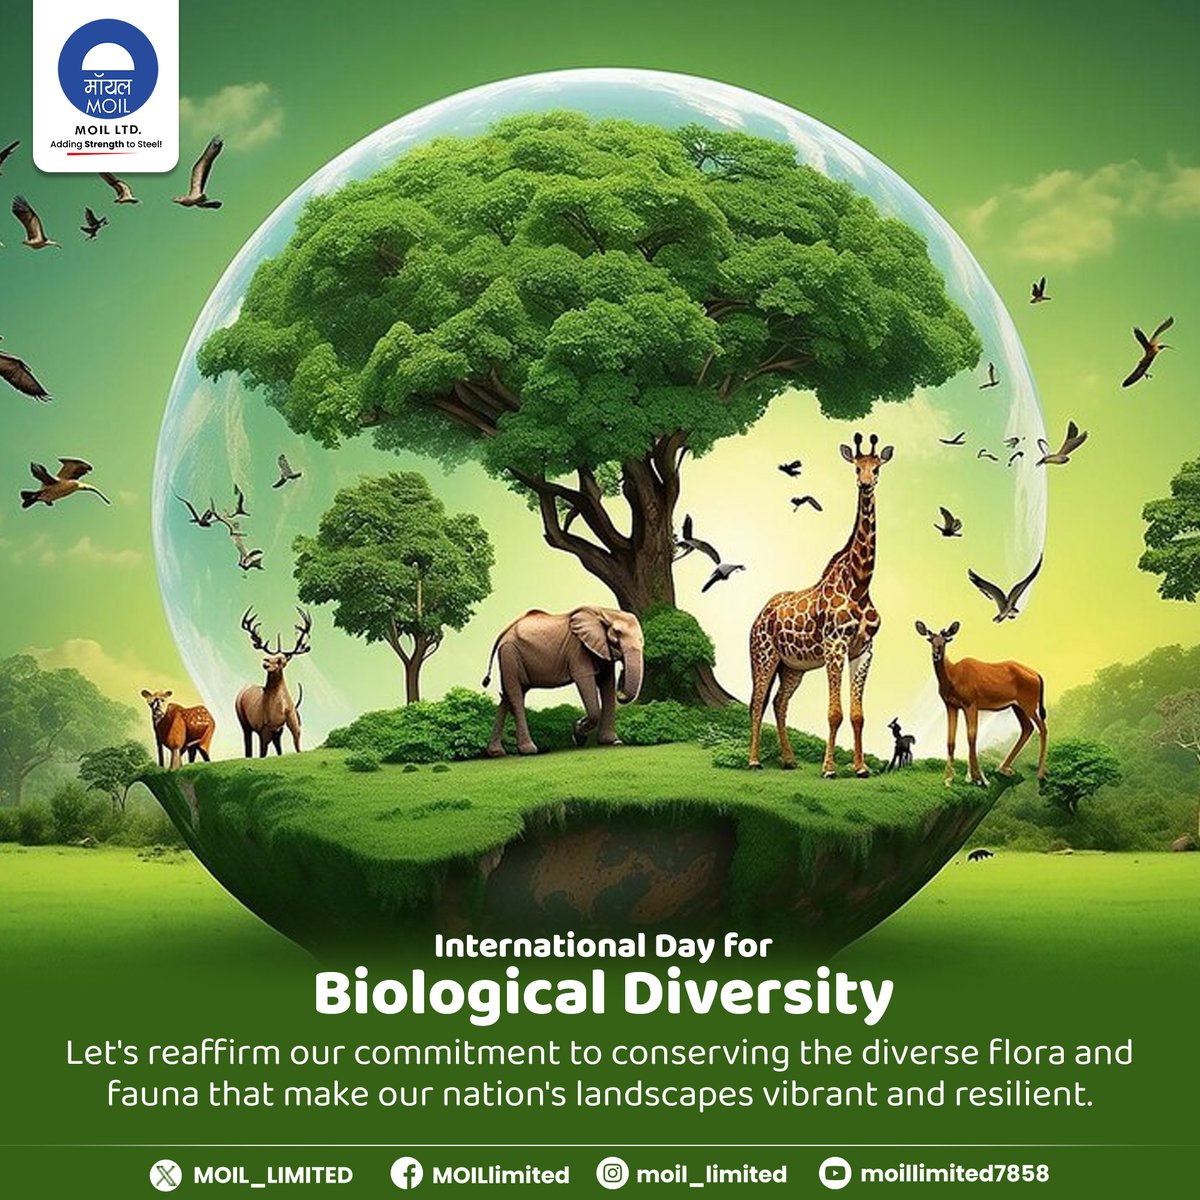 Our planet’s health depends on the richness of its biodiversity. Let's work together to protect it for generations to come. #BiodiversityDay #Sustainability #MOIL #HarEkKaamDeshKeNaam